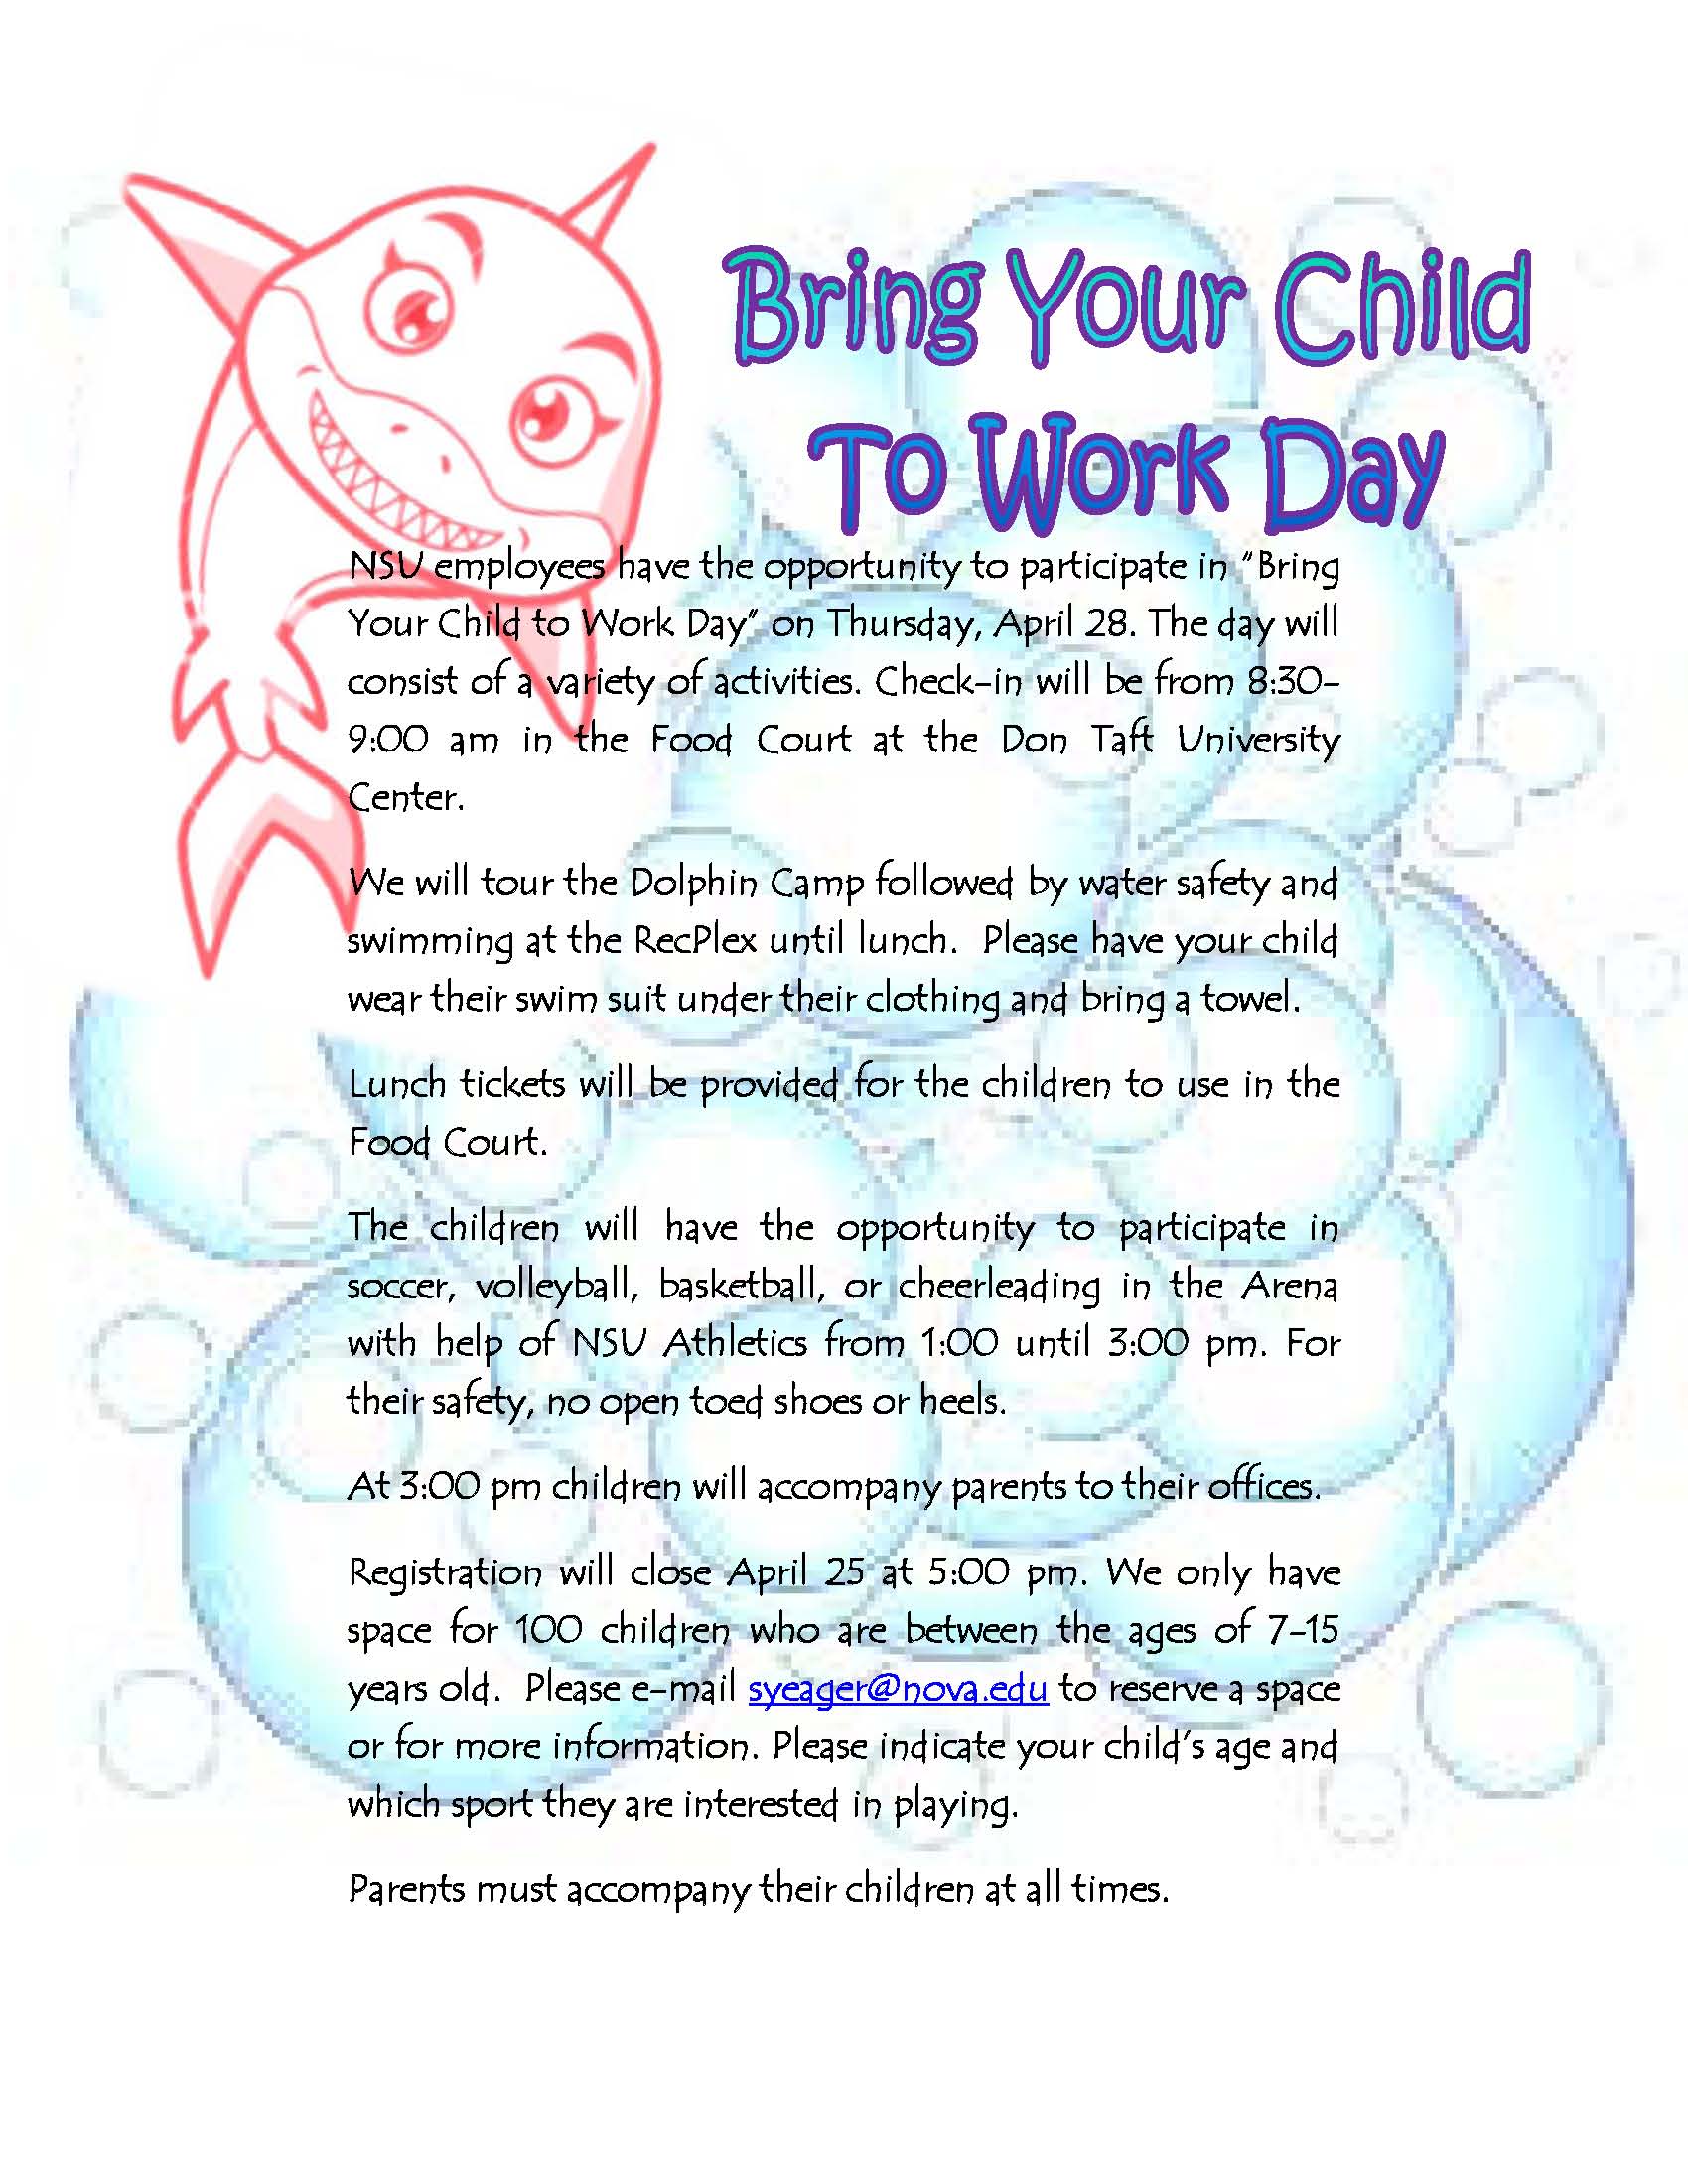 nsu-to-host-annual-bring-your-child-to-work-day-apr-28-nsu-newsroom